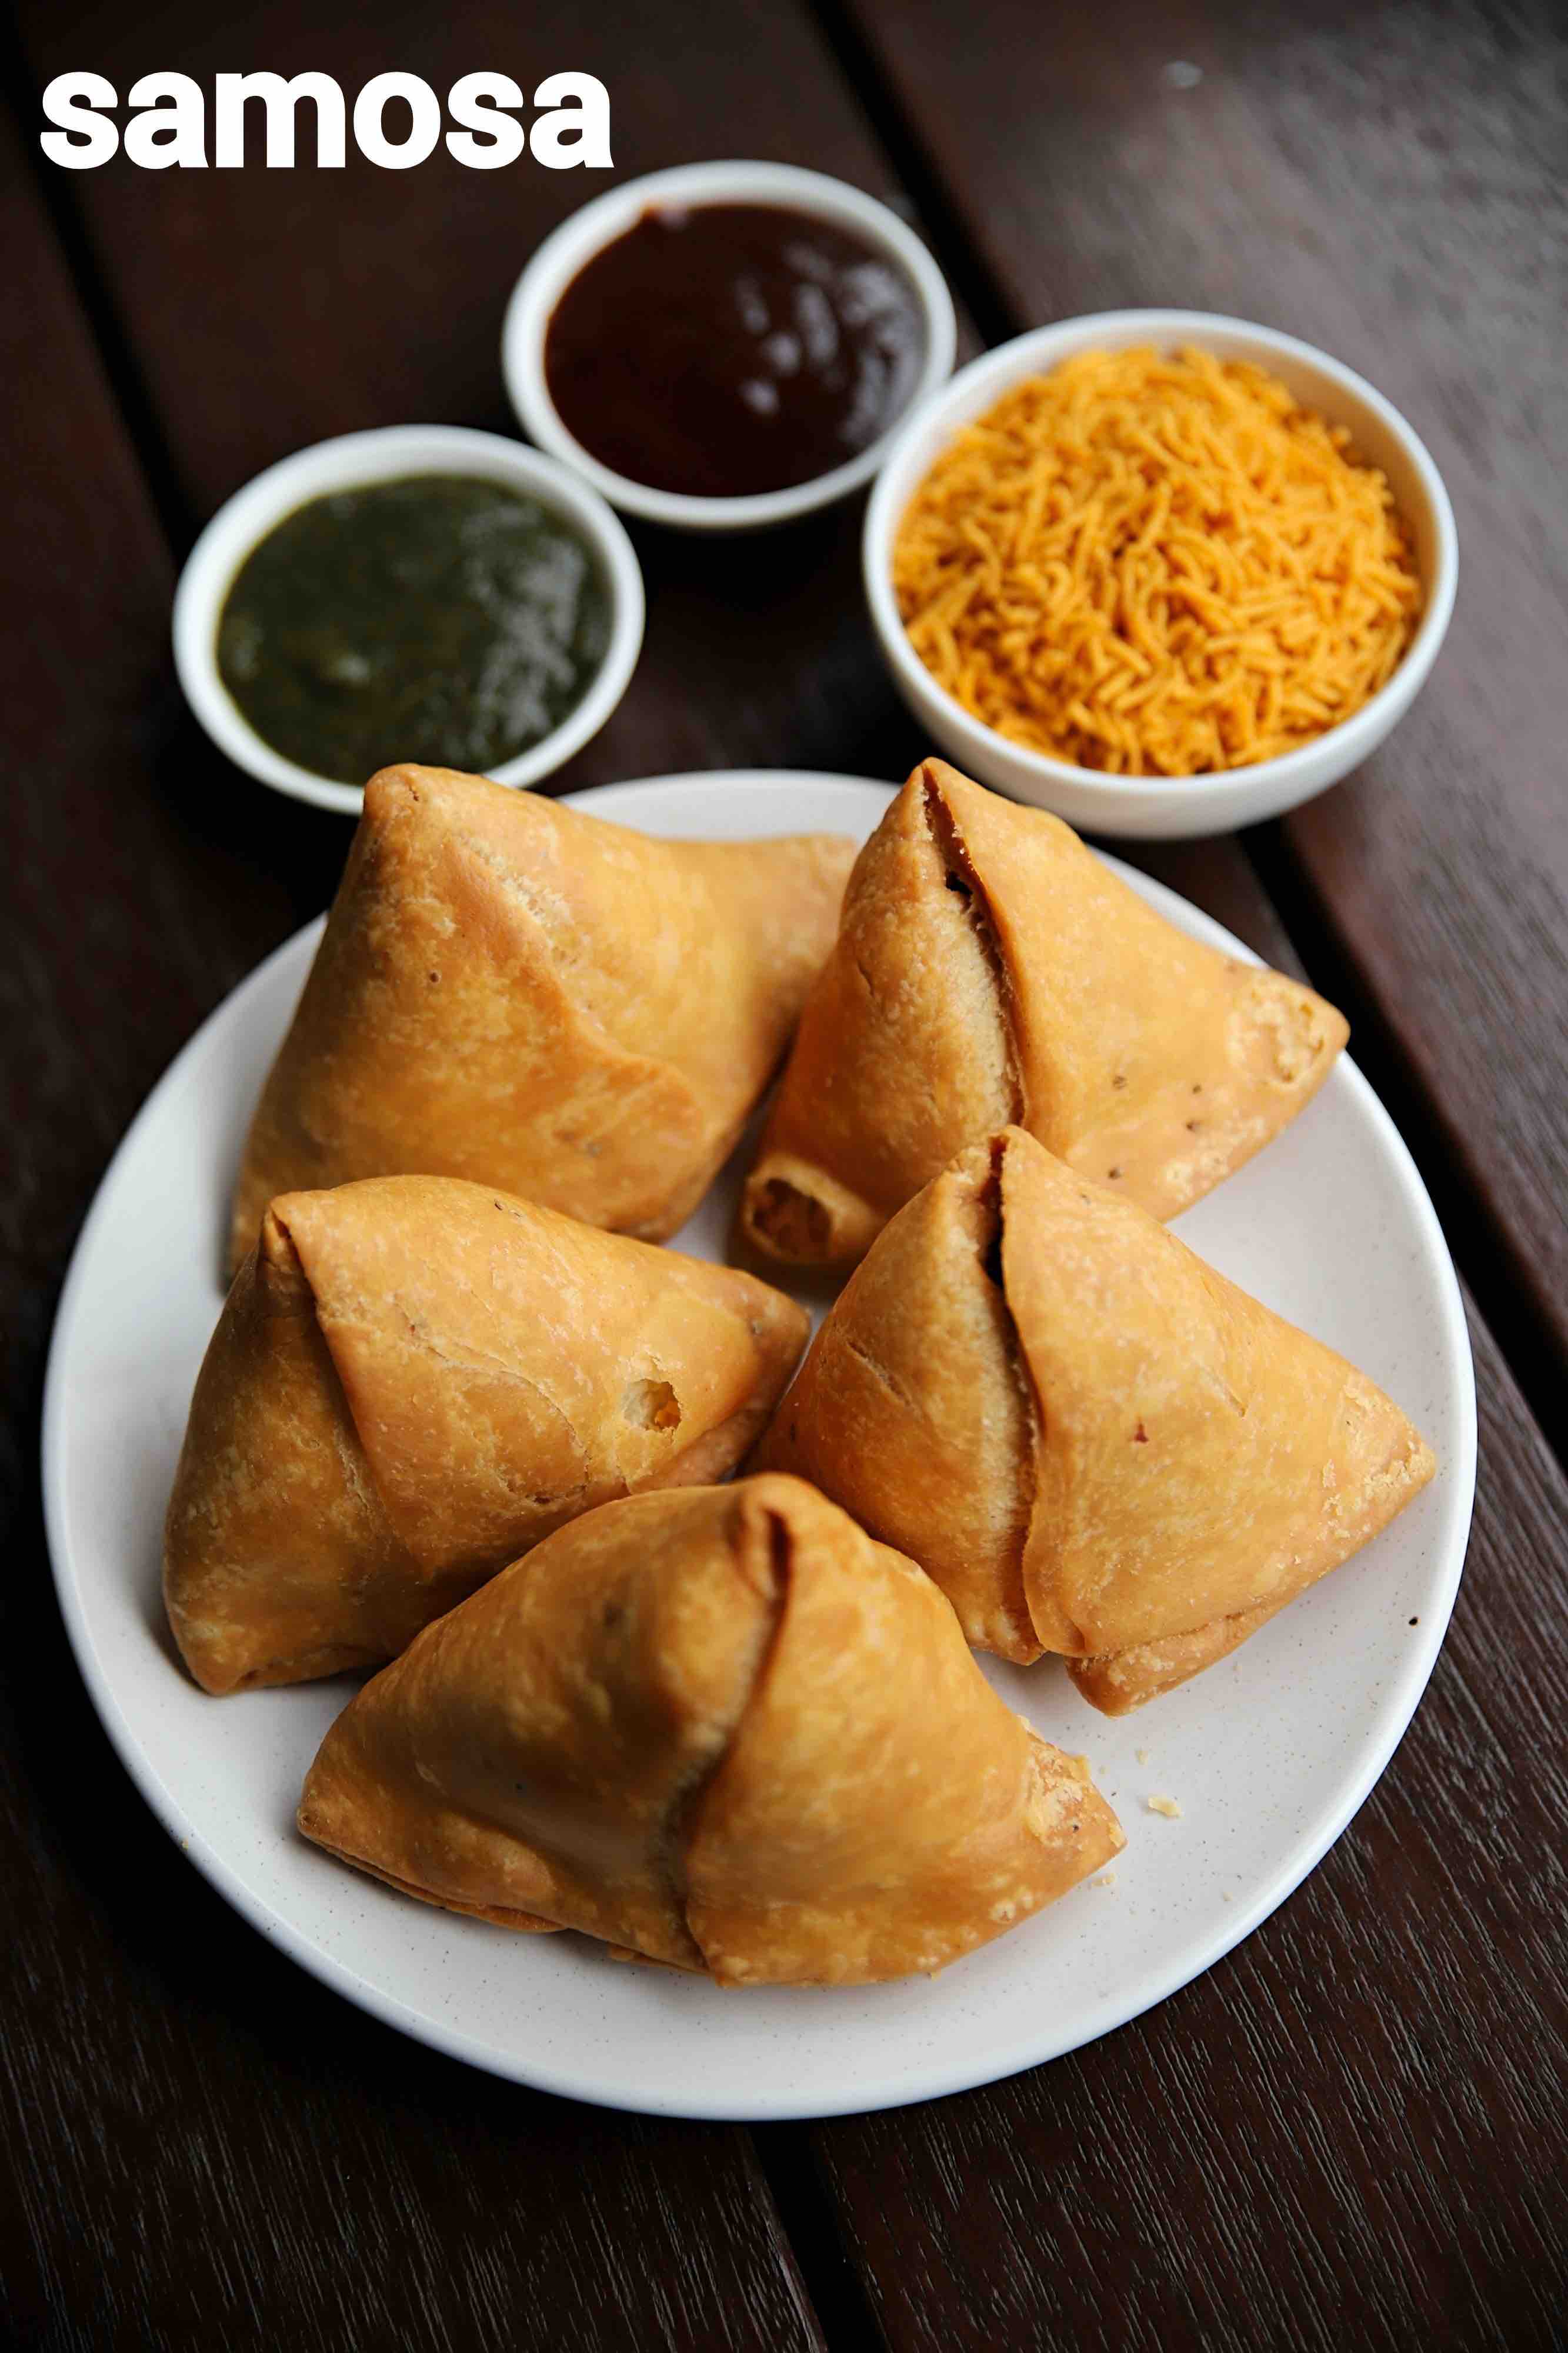 Samosa Recipe Step By Step With Pictures - the meta pictures